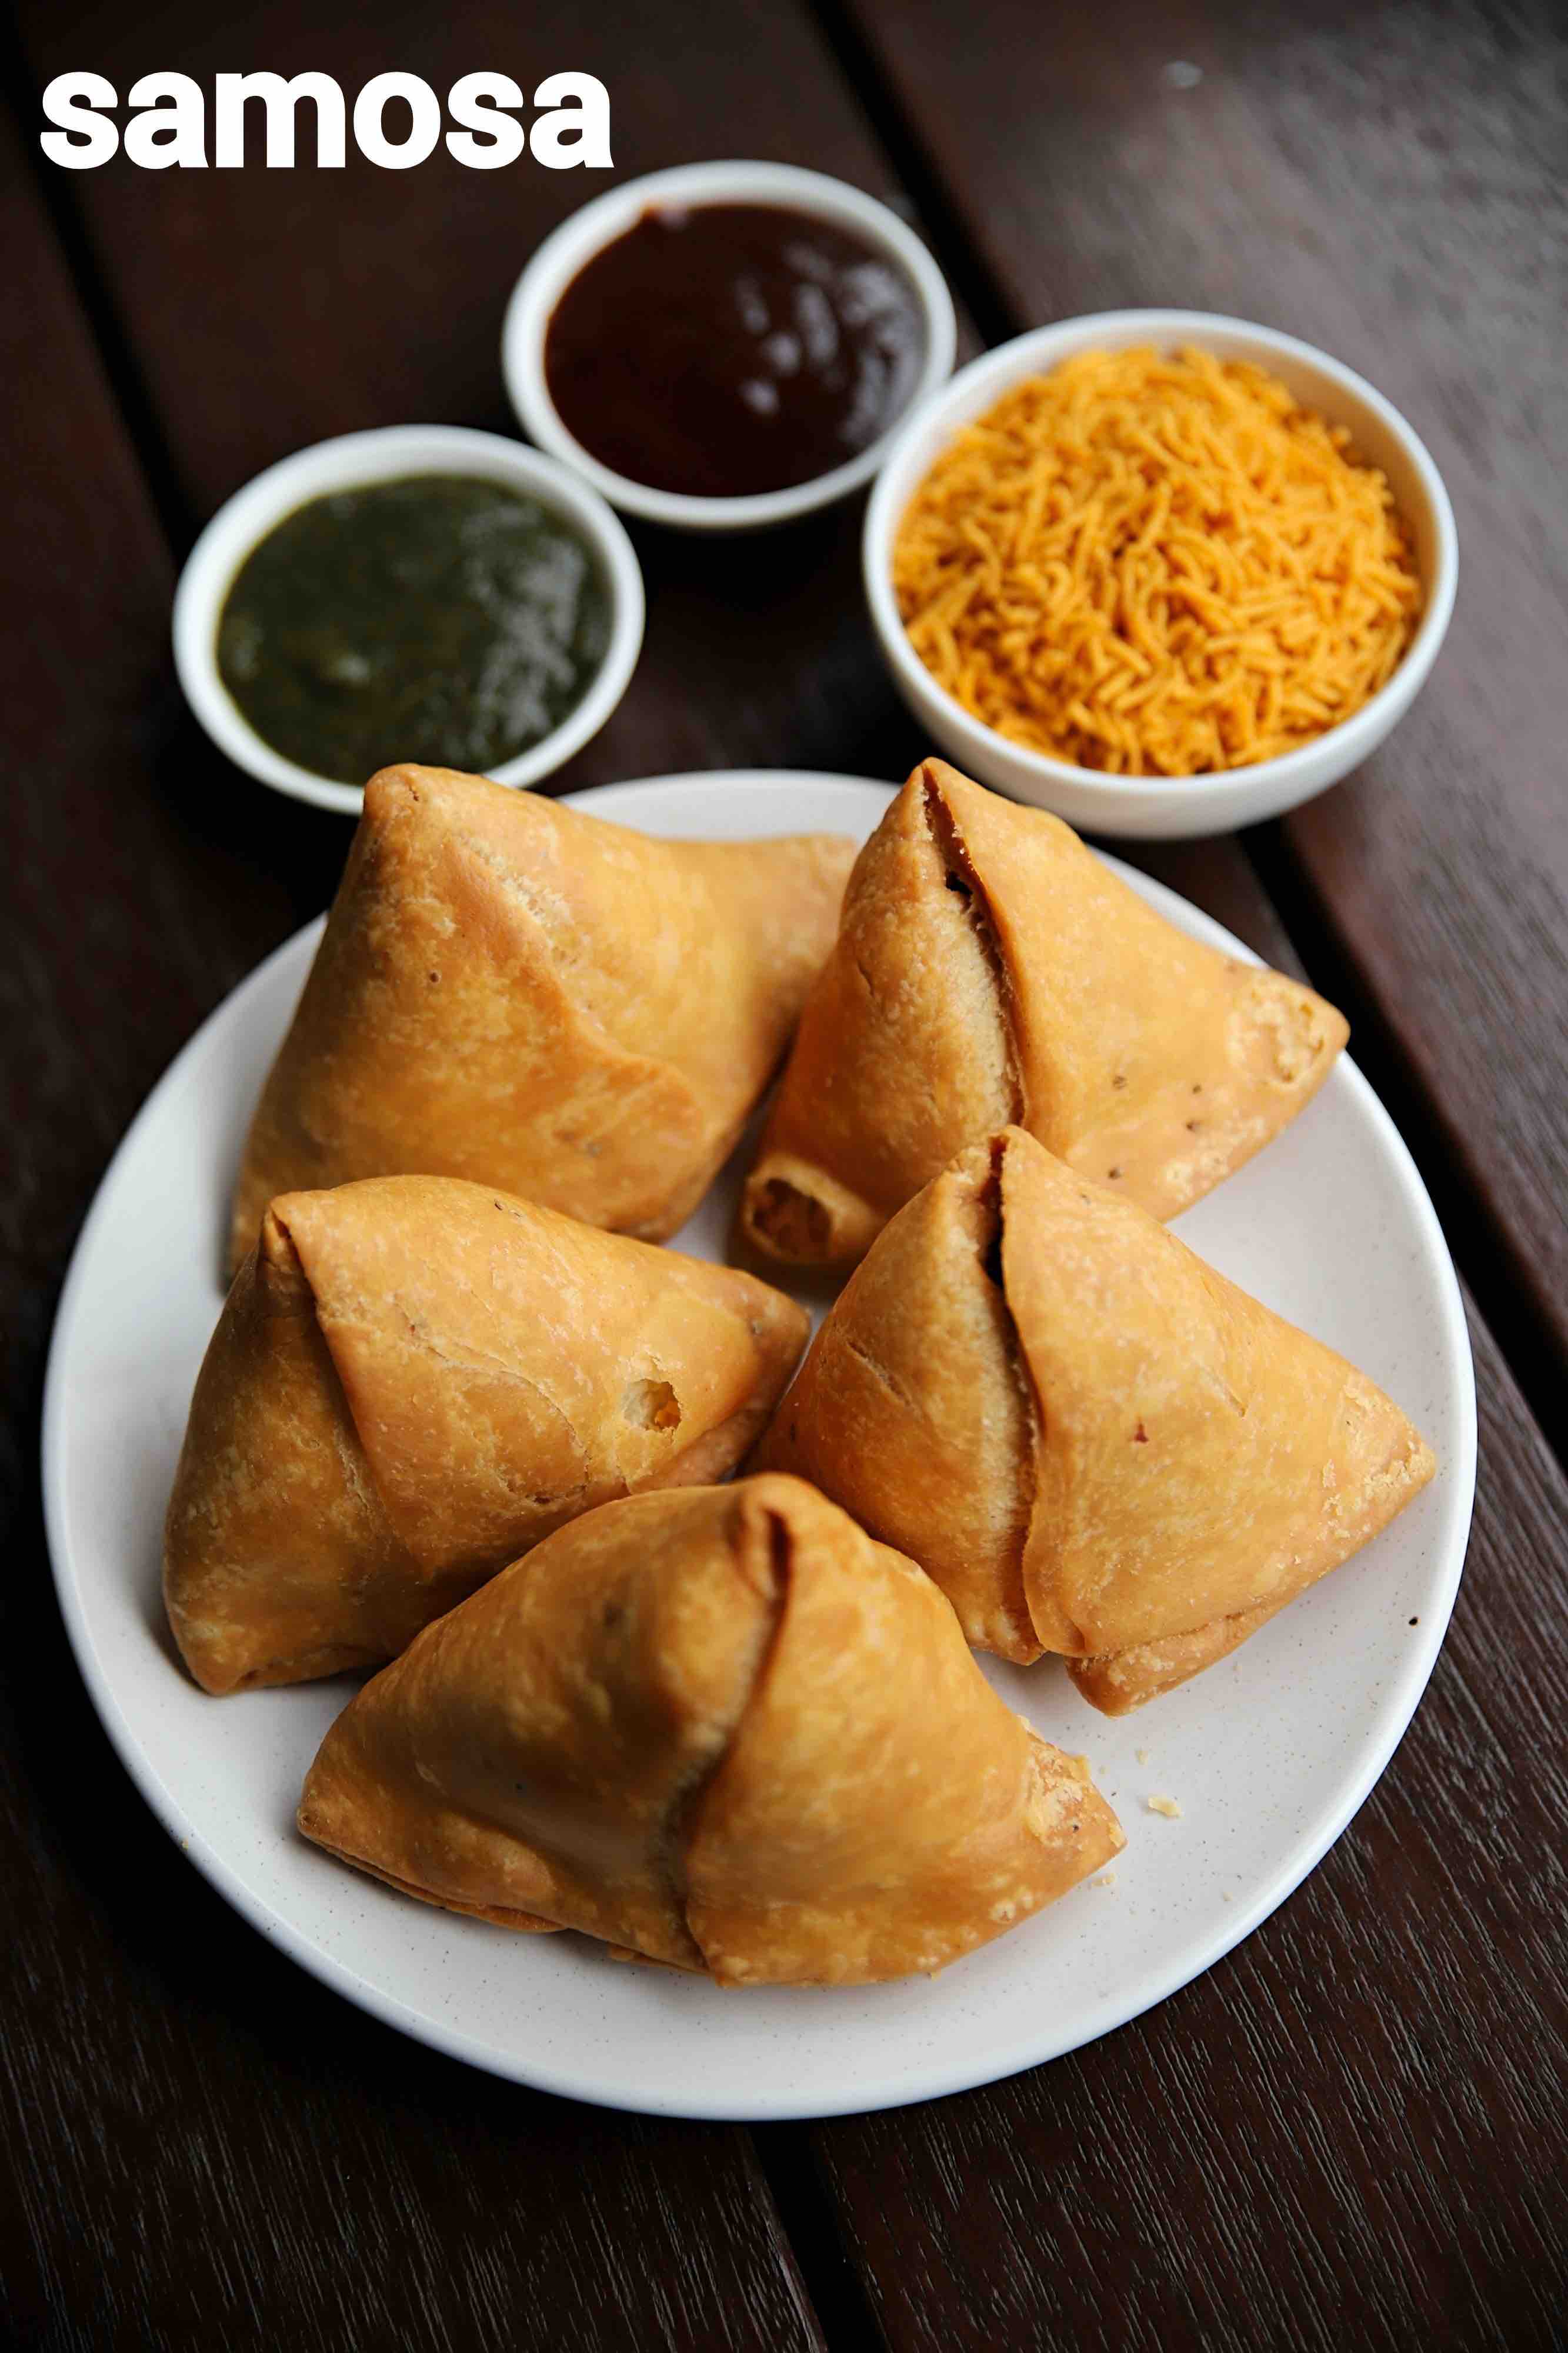 Samosa Recipe Step By Step With Pictures - the meta pictures